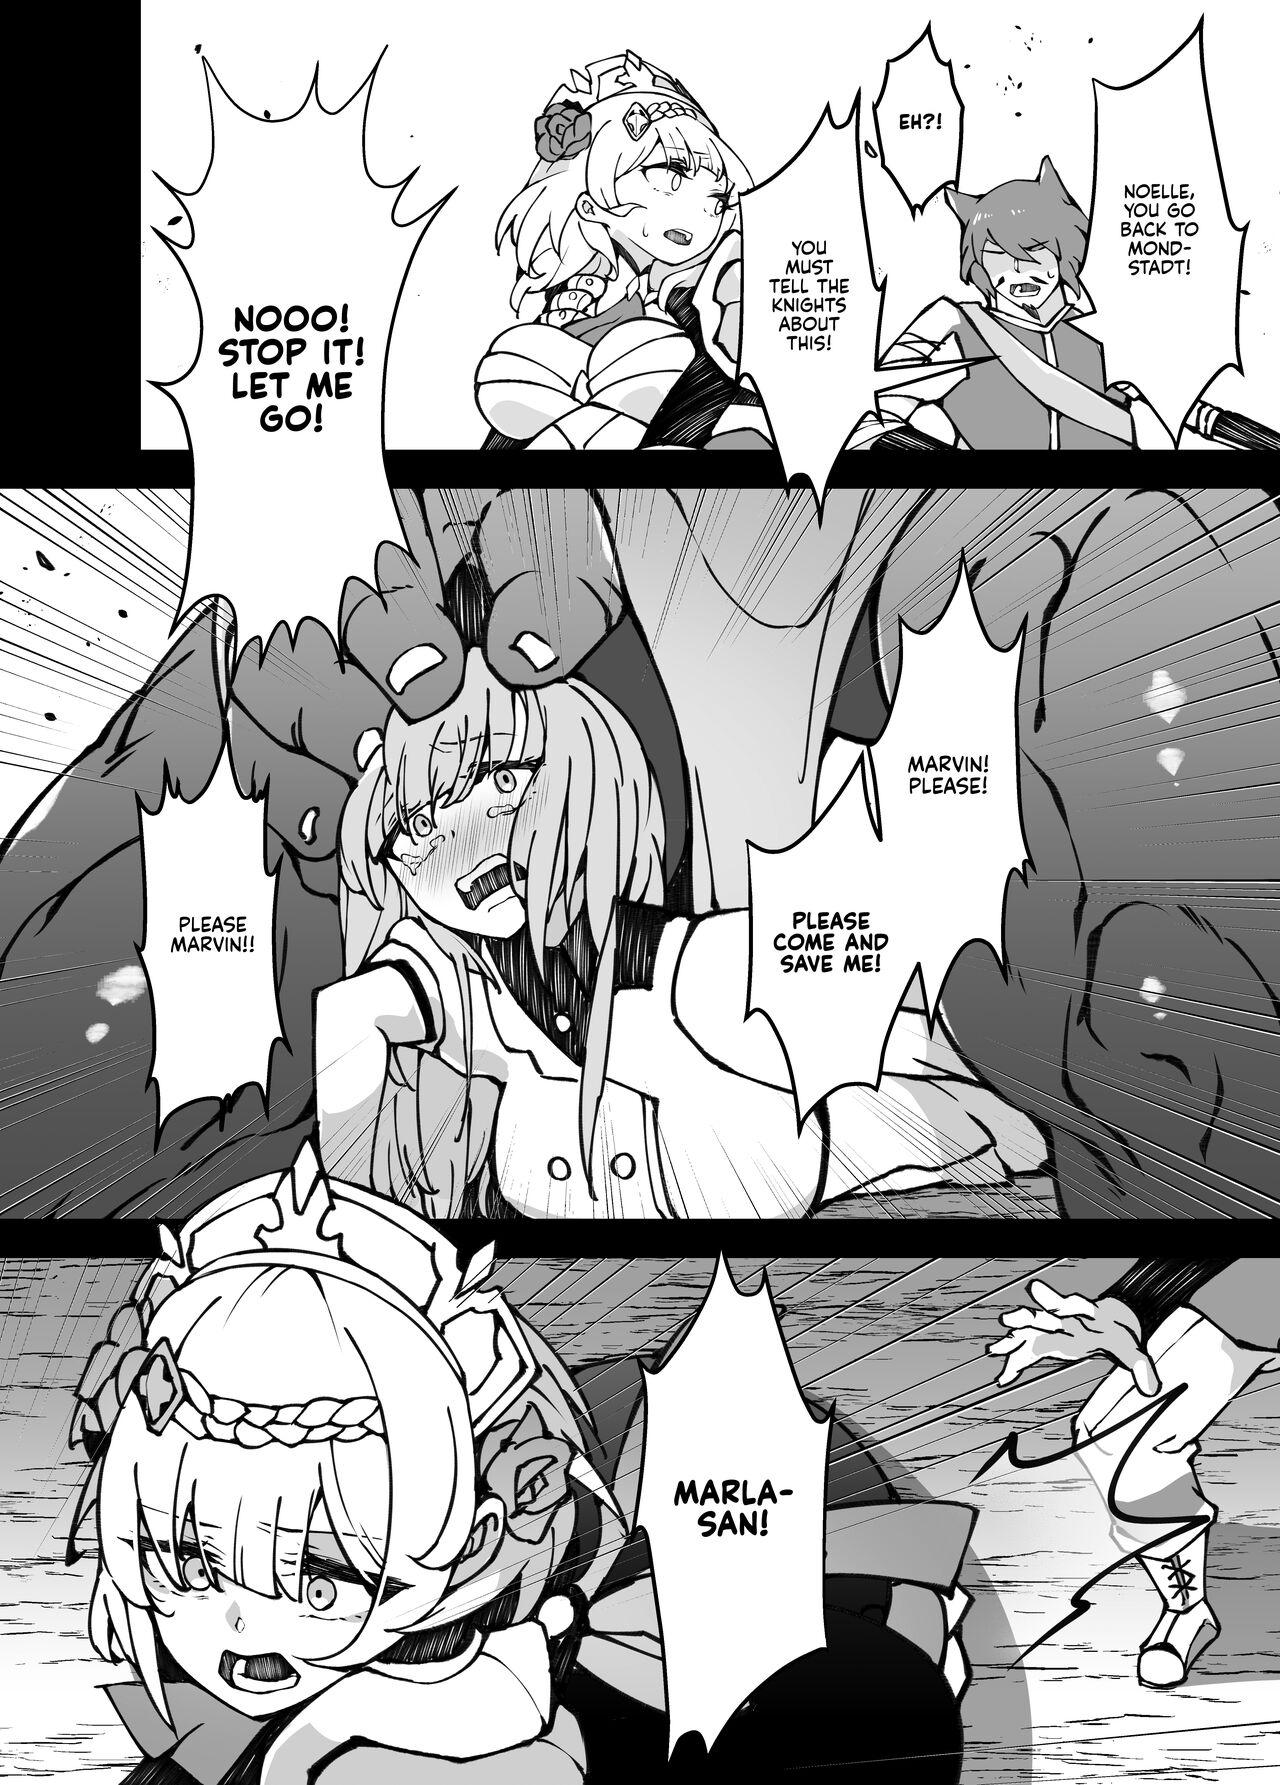 Hungarian [Karouke (Karou)] The Attack of the Hilichurls II ~The Invasion's Prelude~ Noelle,Chivalric Blossom that withered~ (Genshin Impact) [English] [Kyuume] [Digital] - Genshin impact Boots - Page 11